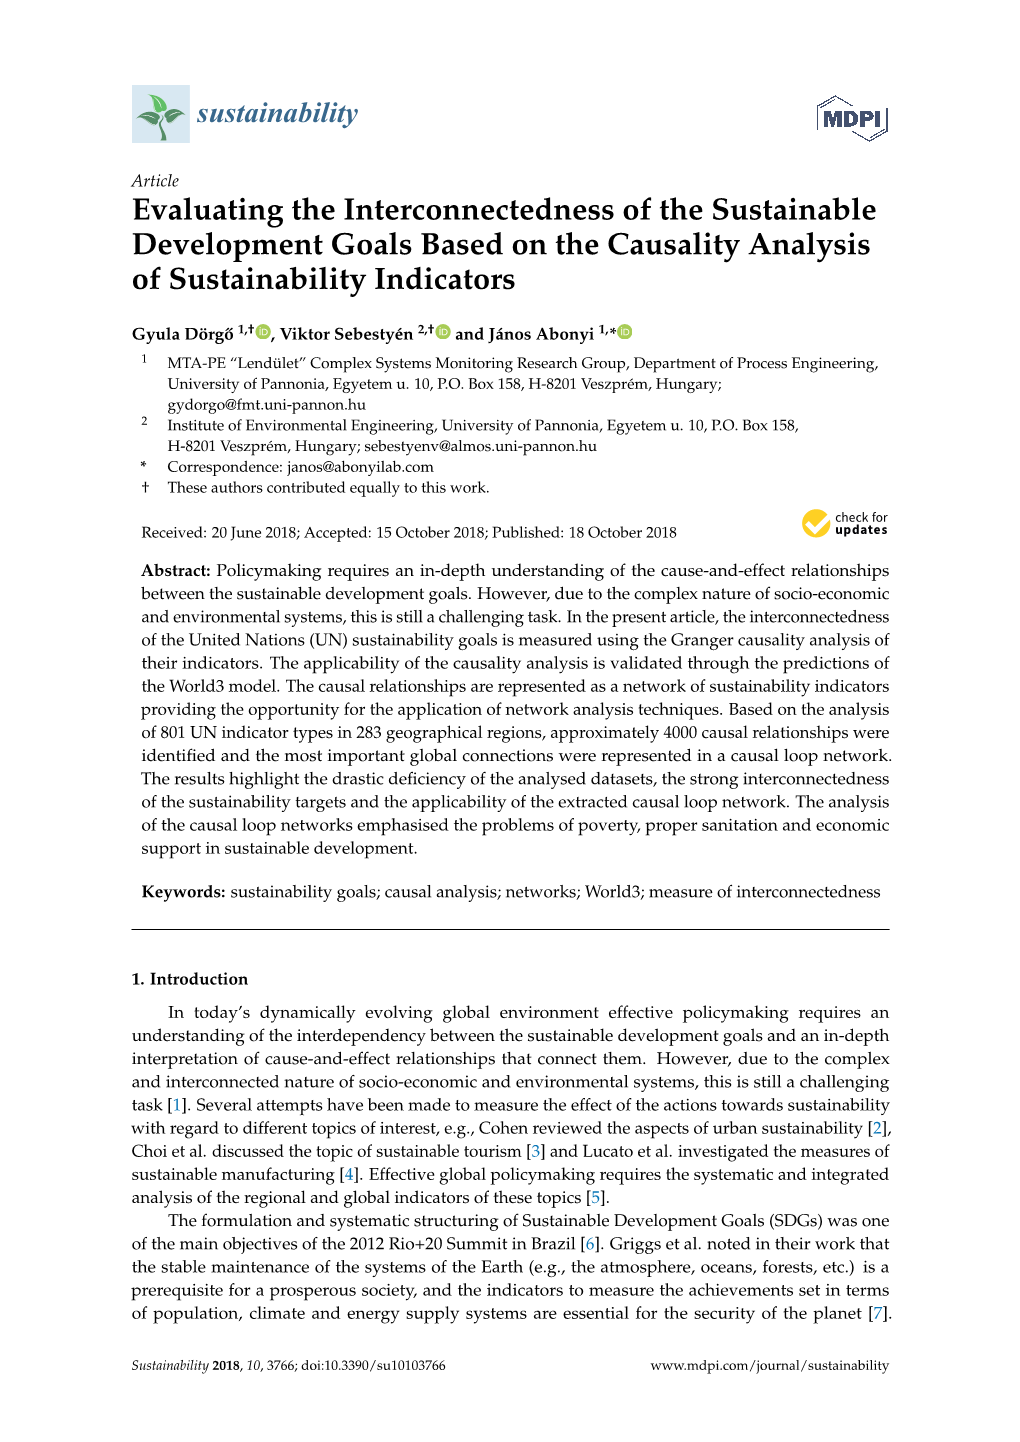 Evaluating the Interconnectedness of the Sustainable Development Goals Based on the Causality Analysis of Sustainability Indicators